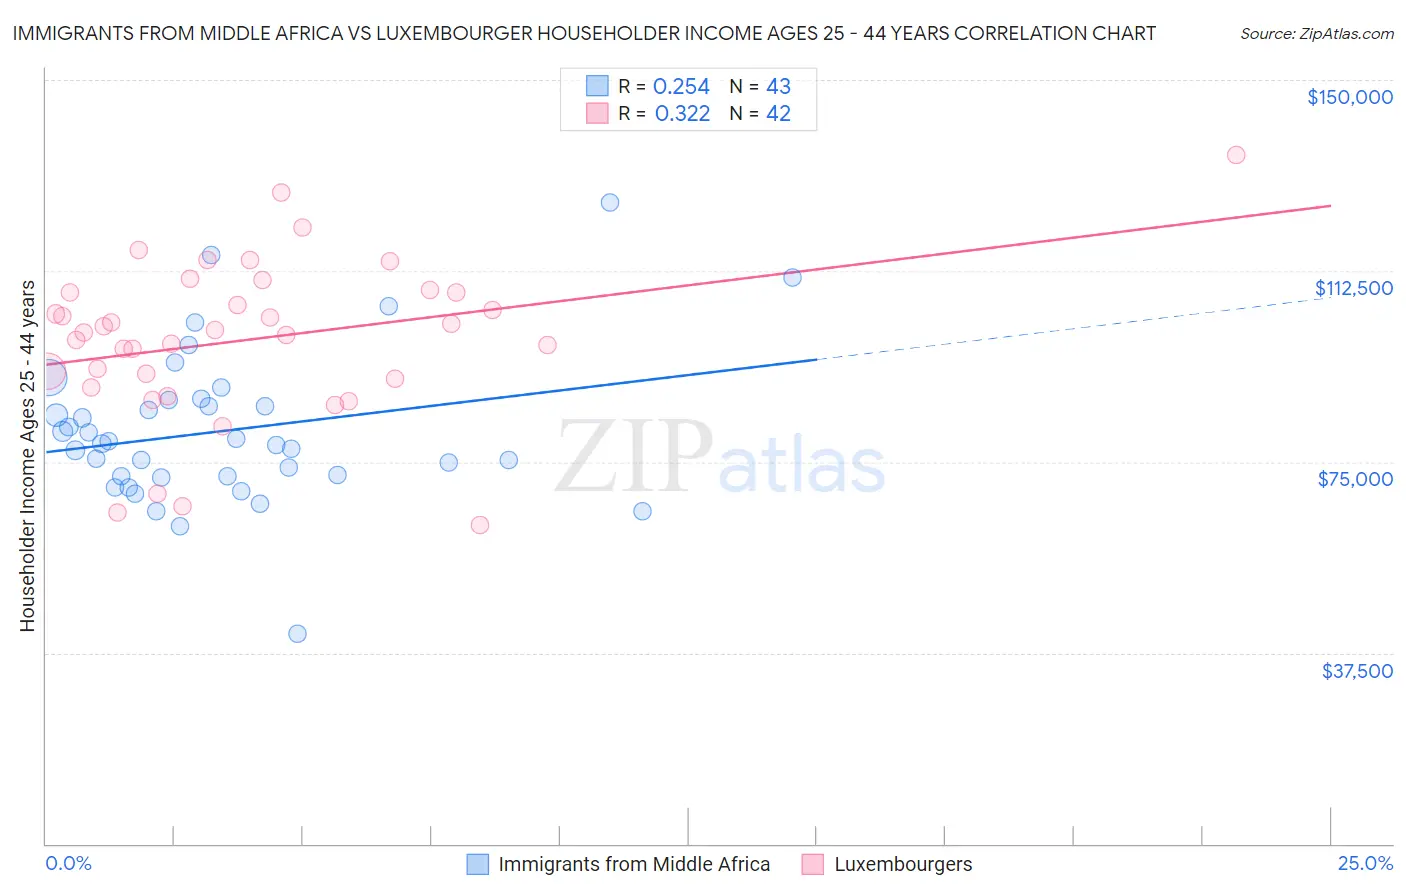 Immigrants from Middle Africa vs Luxembourger Householder Income Ages 25 - 44 years